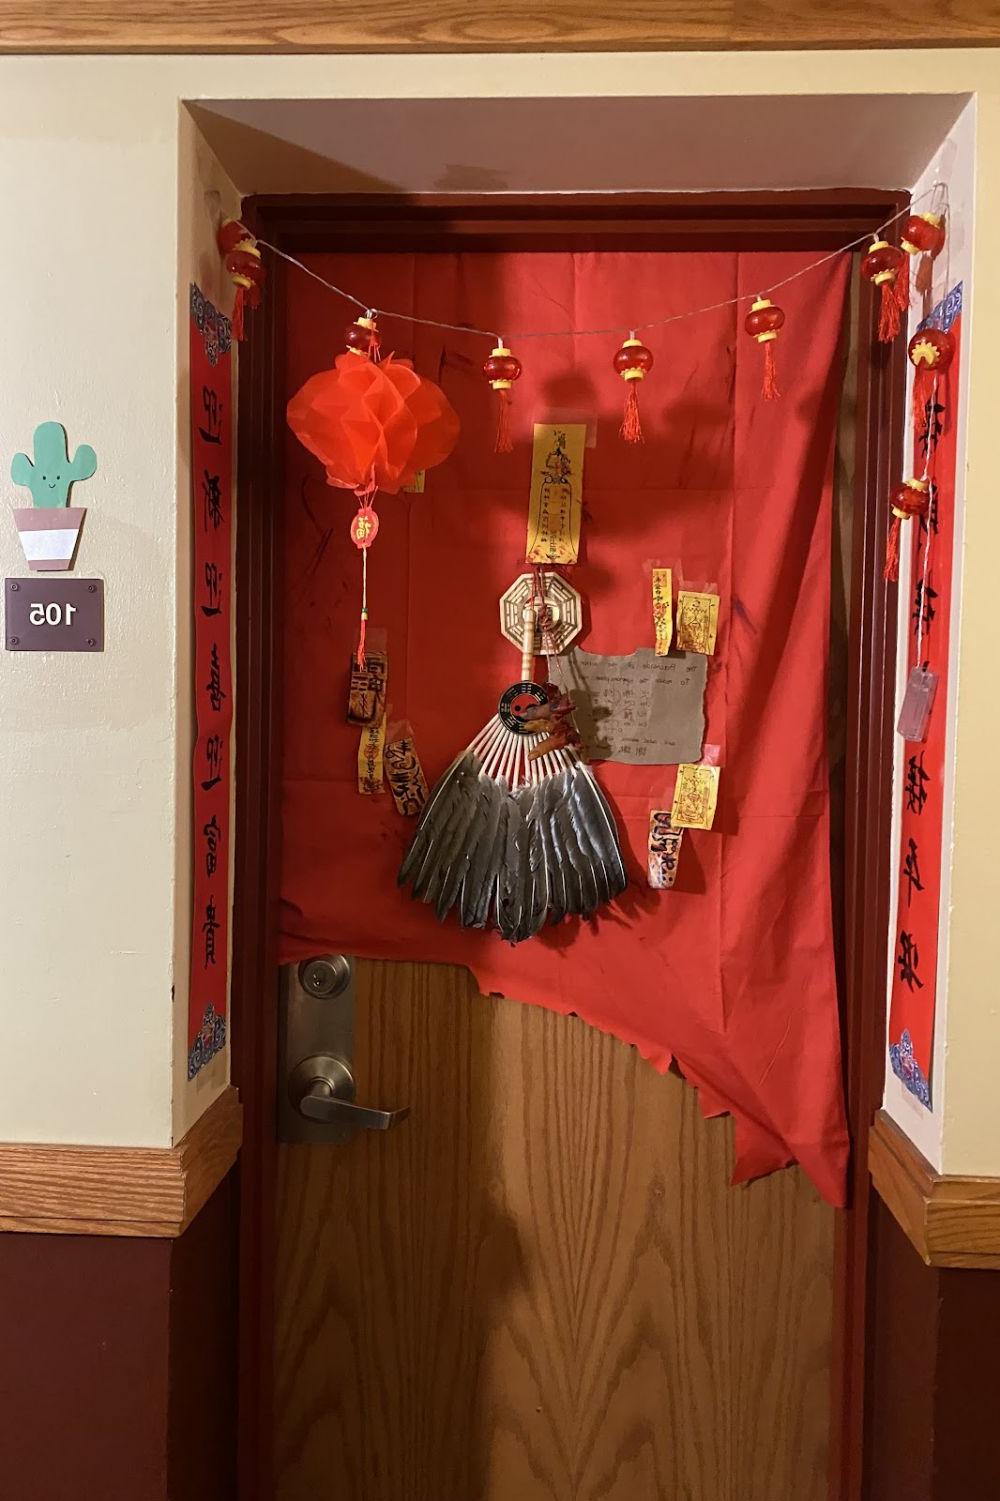 A dorm door decorated in Chinese lanterns and talismans, and a dead hand.